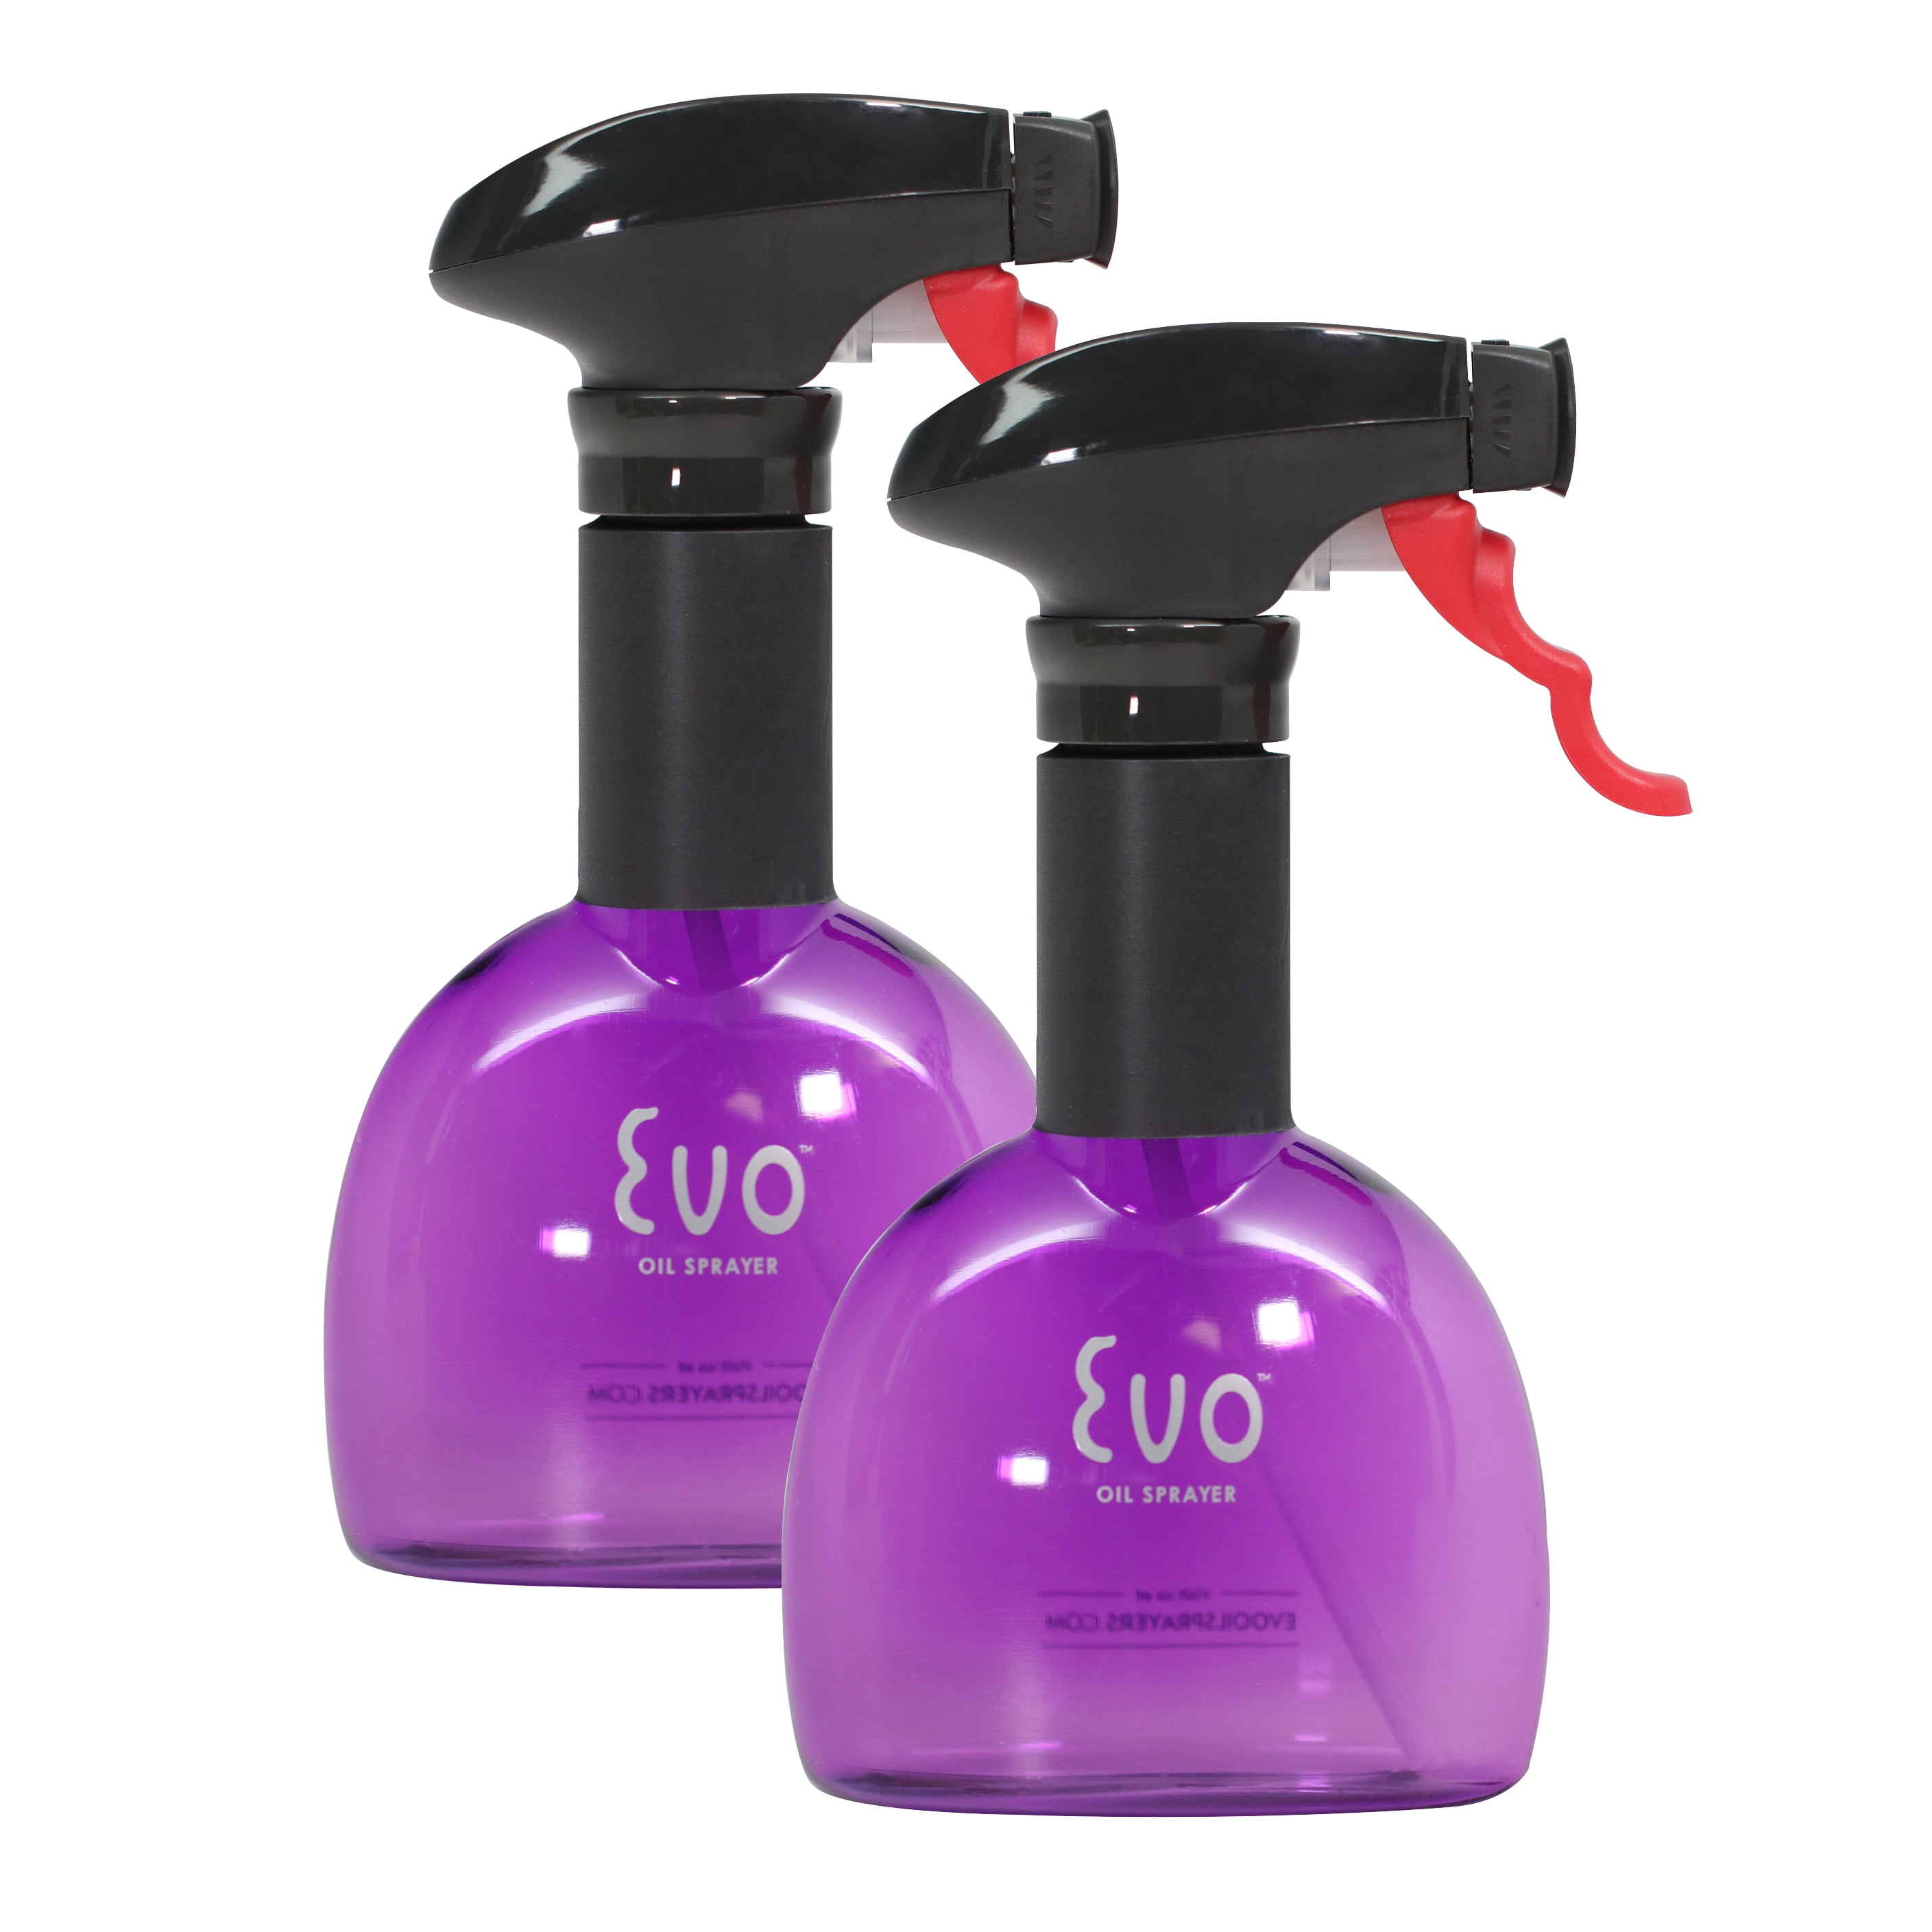 18/8 Stainless Steel Evo Oil Sprayer Bottle Non-Aerosol for Olive Oil and Cooking Oils 16-ounce Capacity Purple 